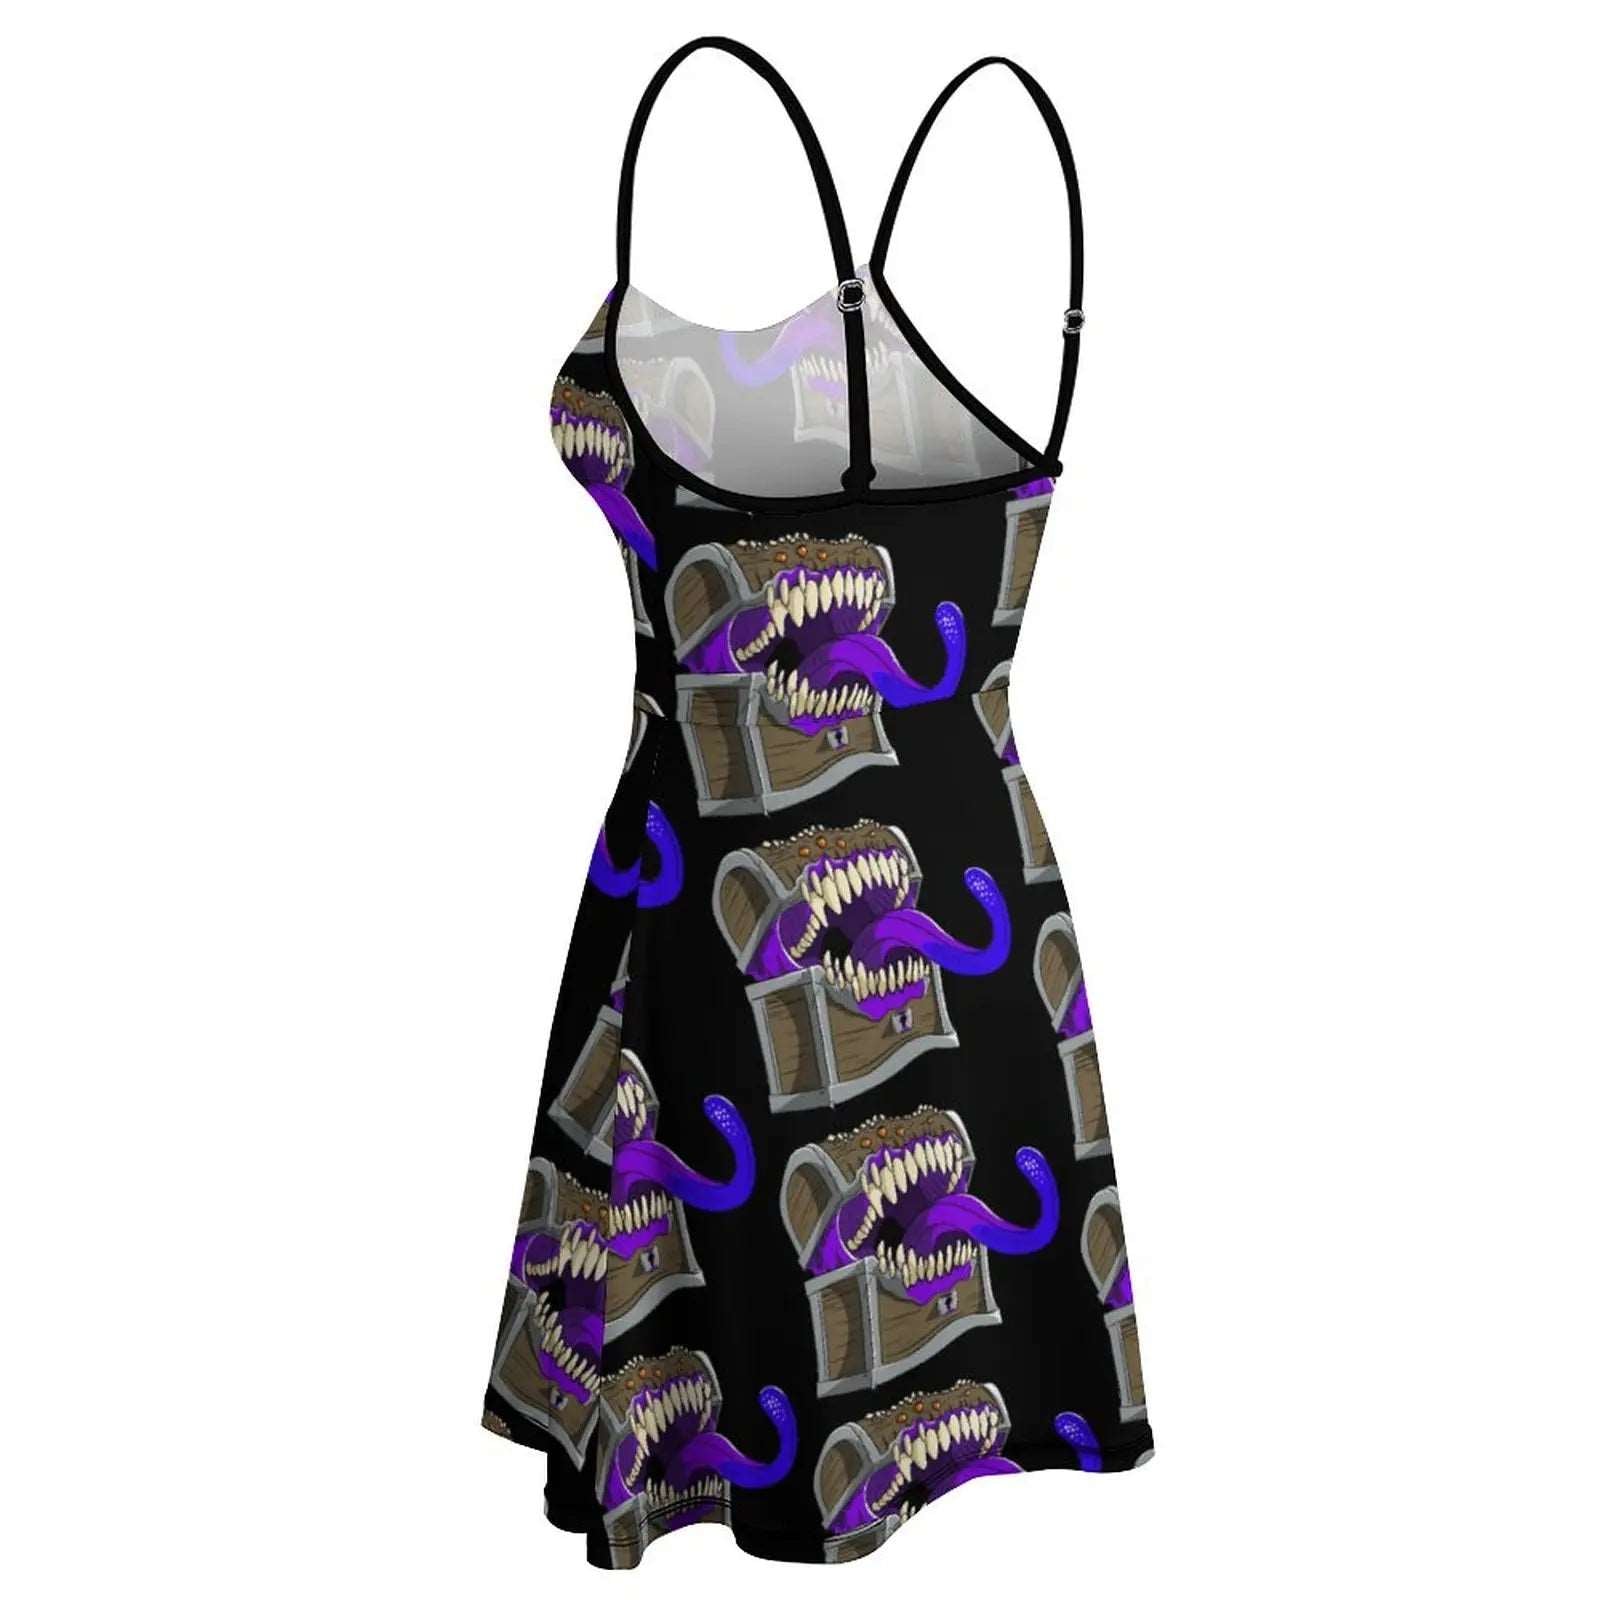 & Dragons Mimic for Sale Women's Sling Dress Graphic Vintage Sexy  Woman's Dress Geek  Clubs Strappy Dress